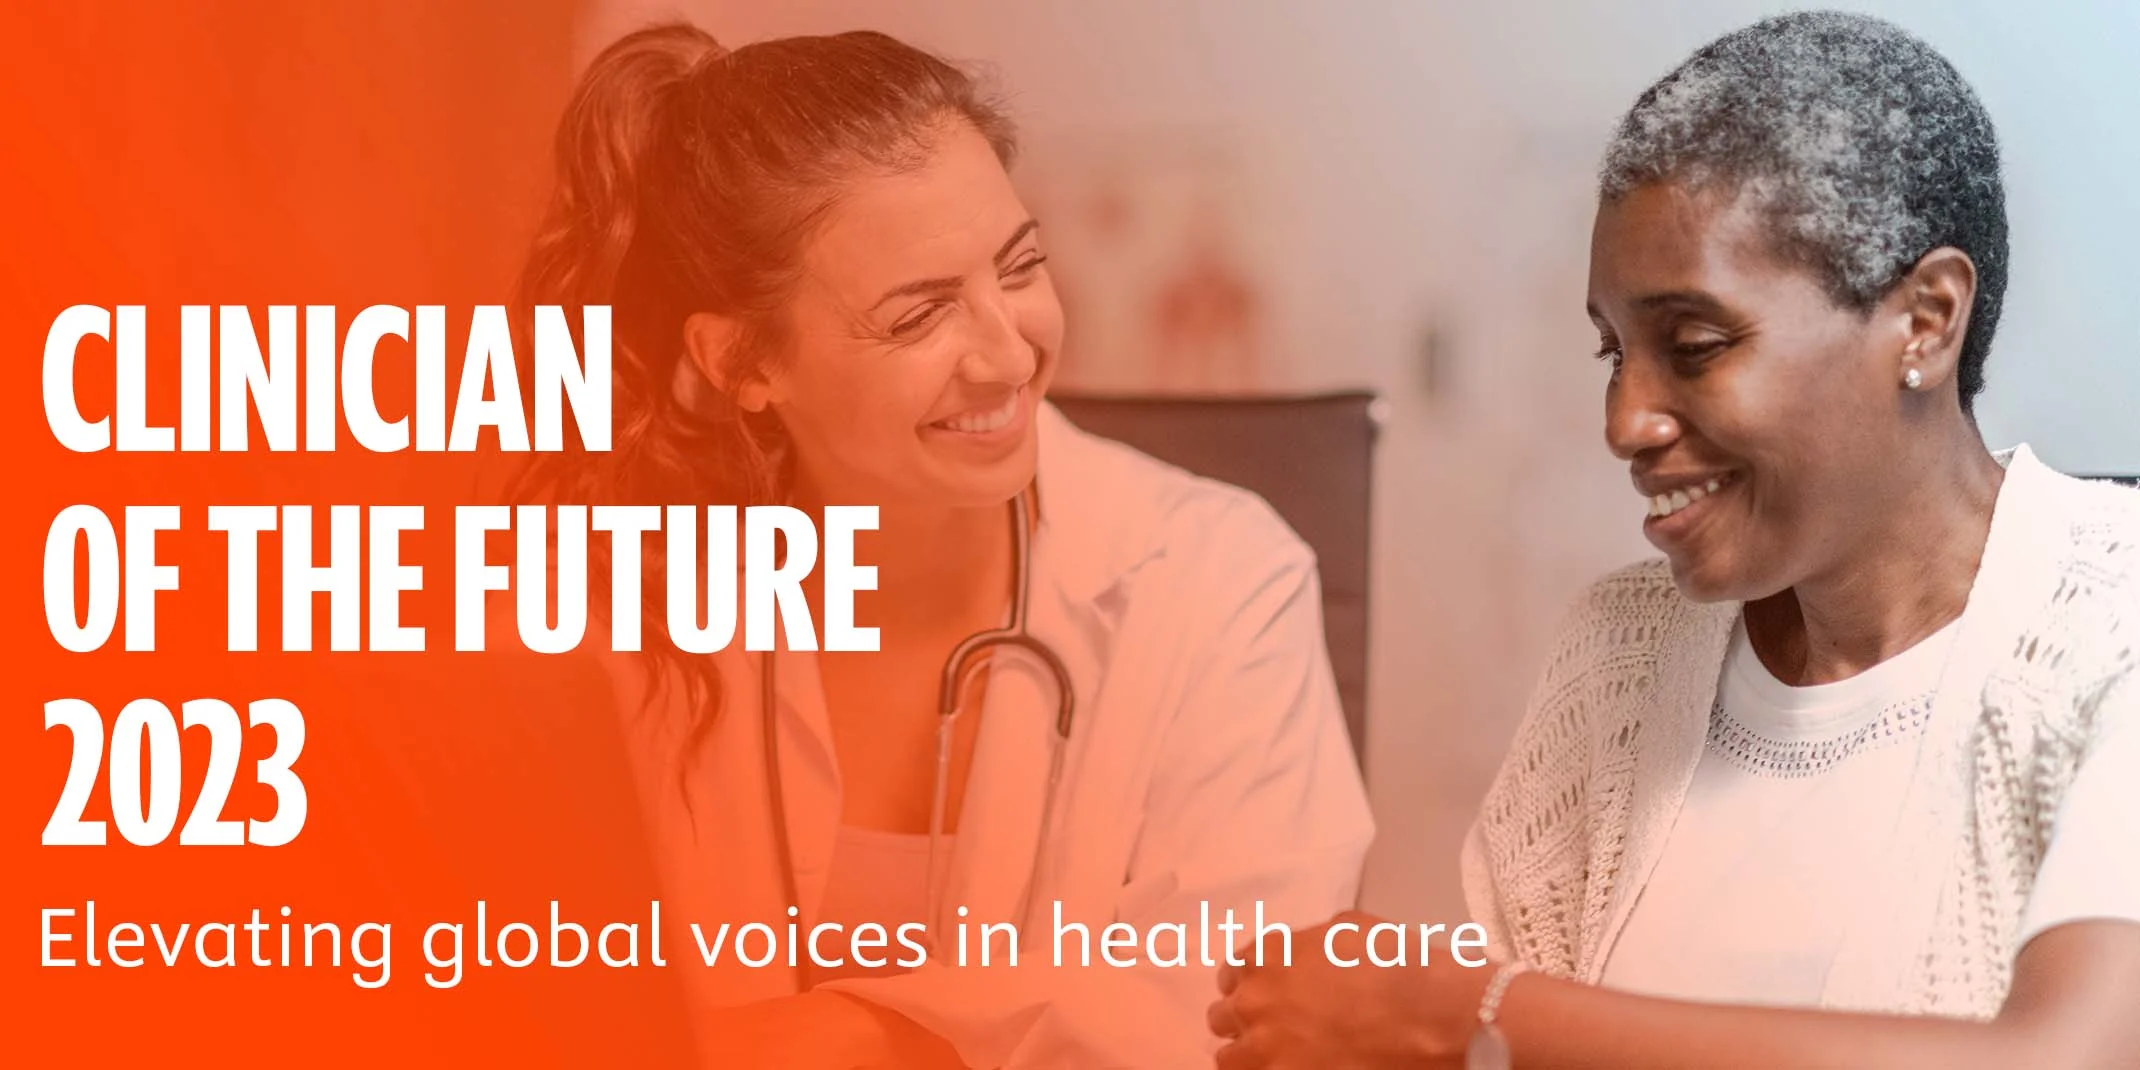 Clinician of the Future 2023 banner - Female clinician smiling at female patient